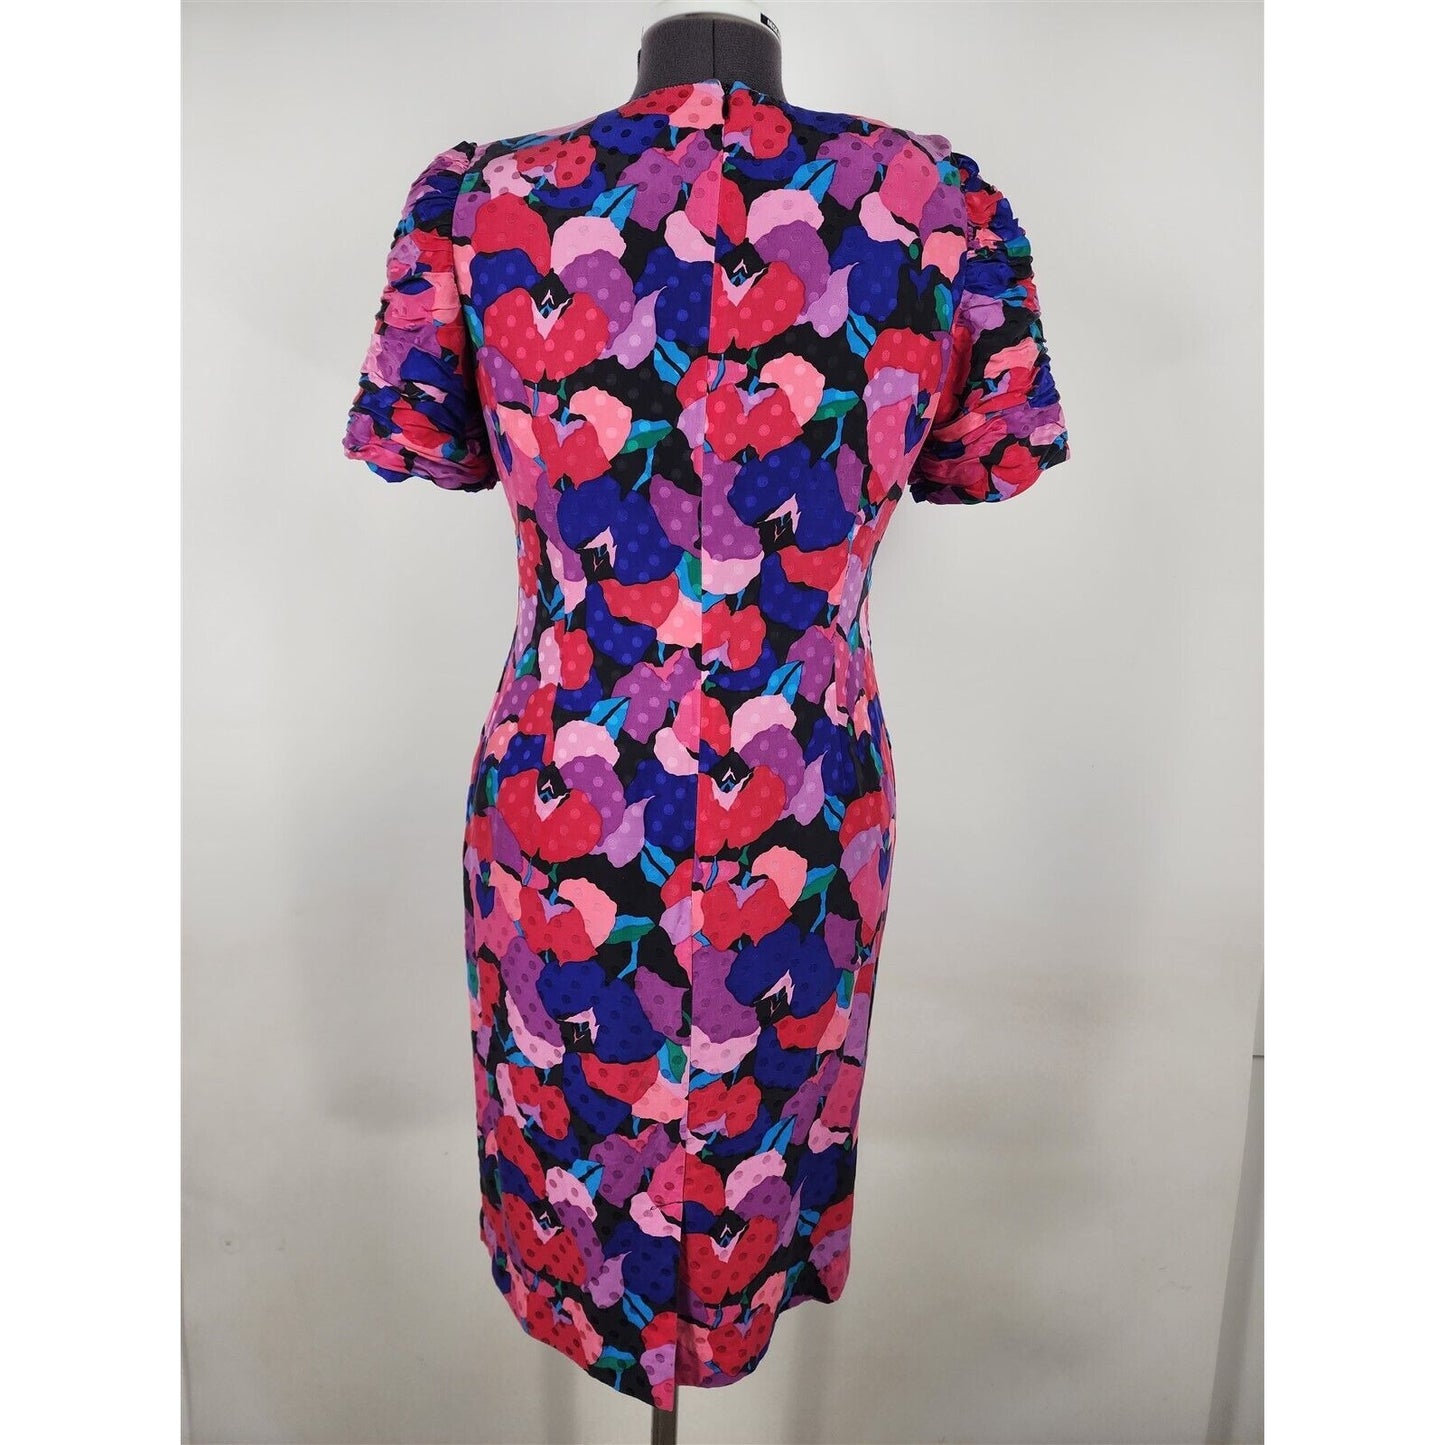 Vintage 80s Vibrant Print Silk Dress Short Sleeve Colorful Hot Pink Red Size 10P